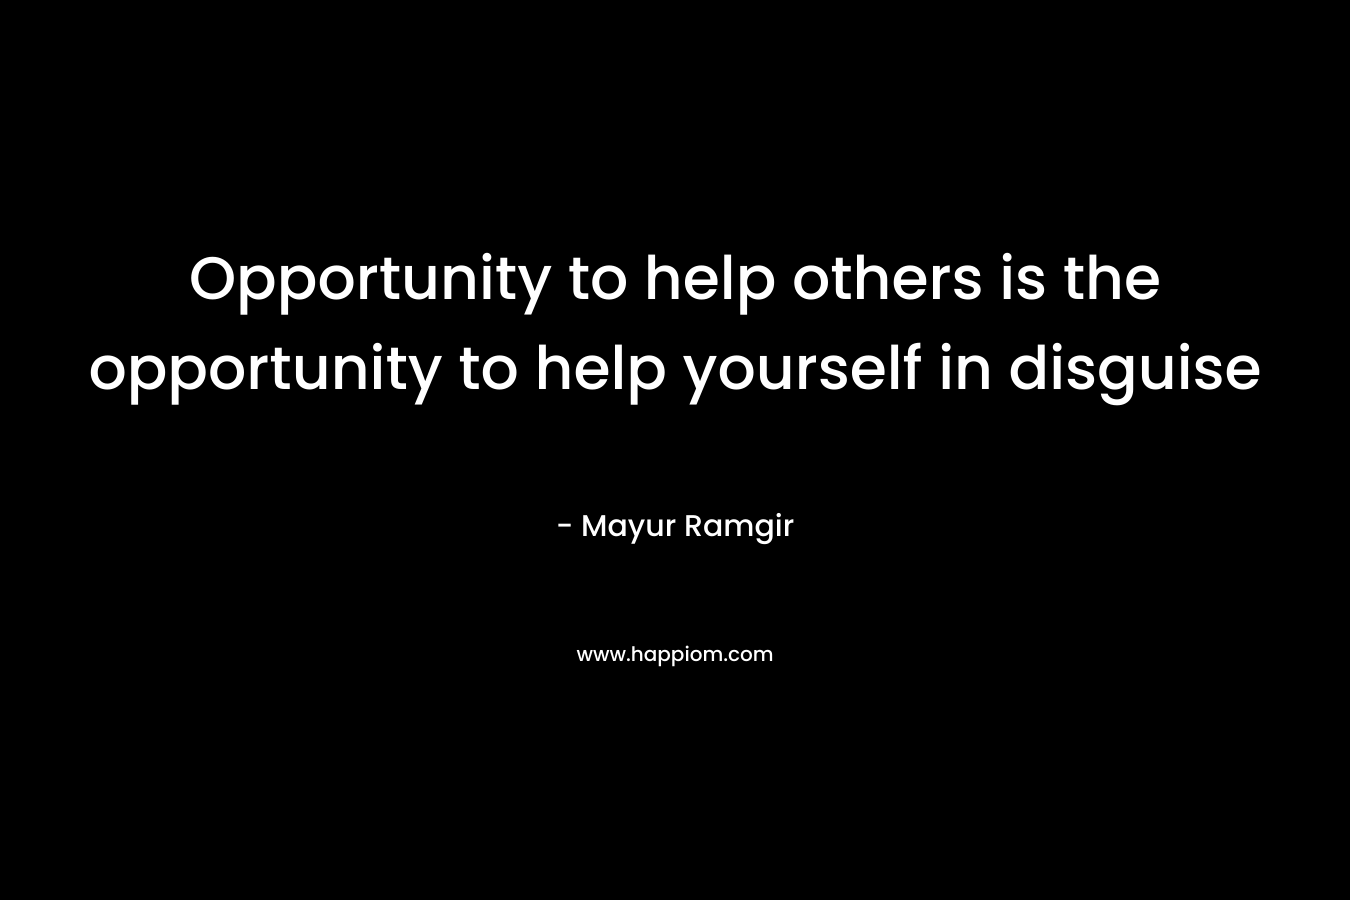 Opportunity to help others is the opportunity to help yourself in disguise